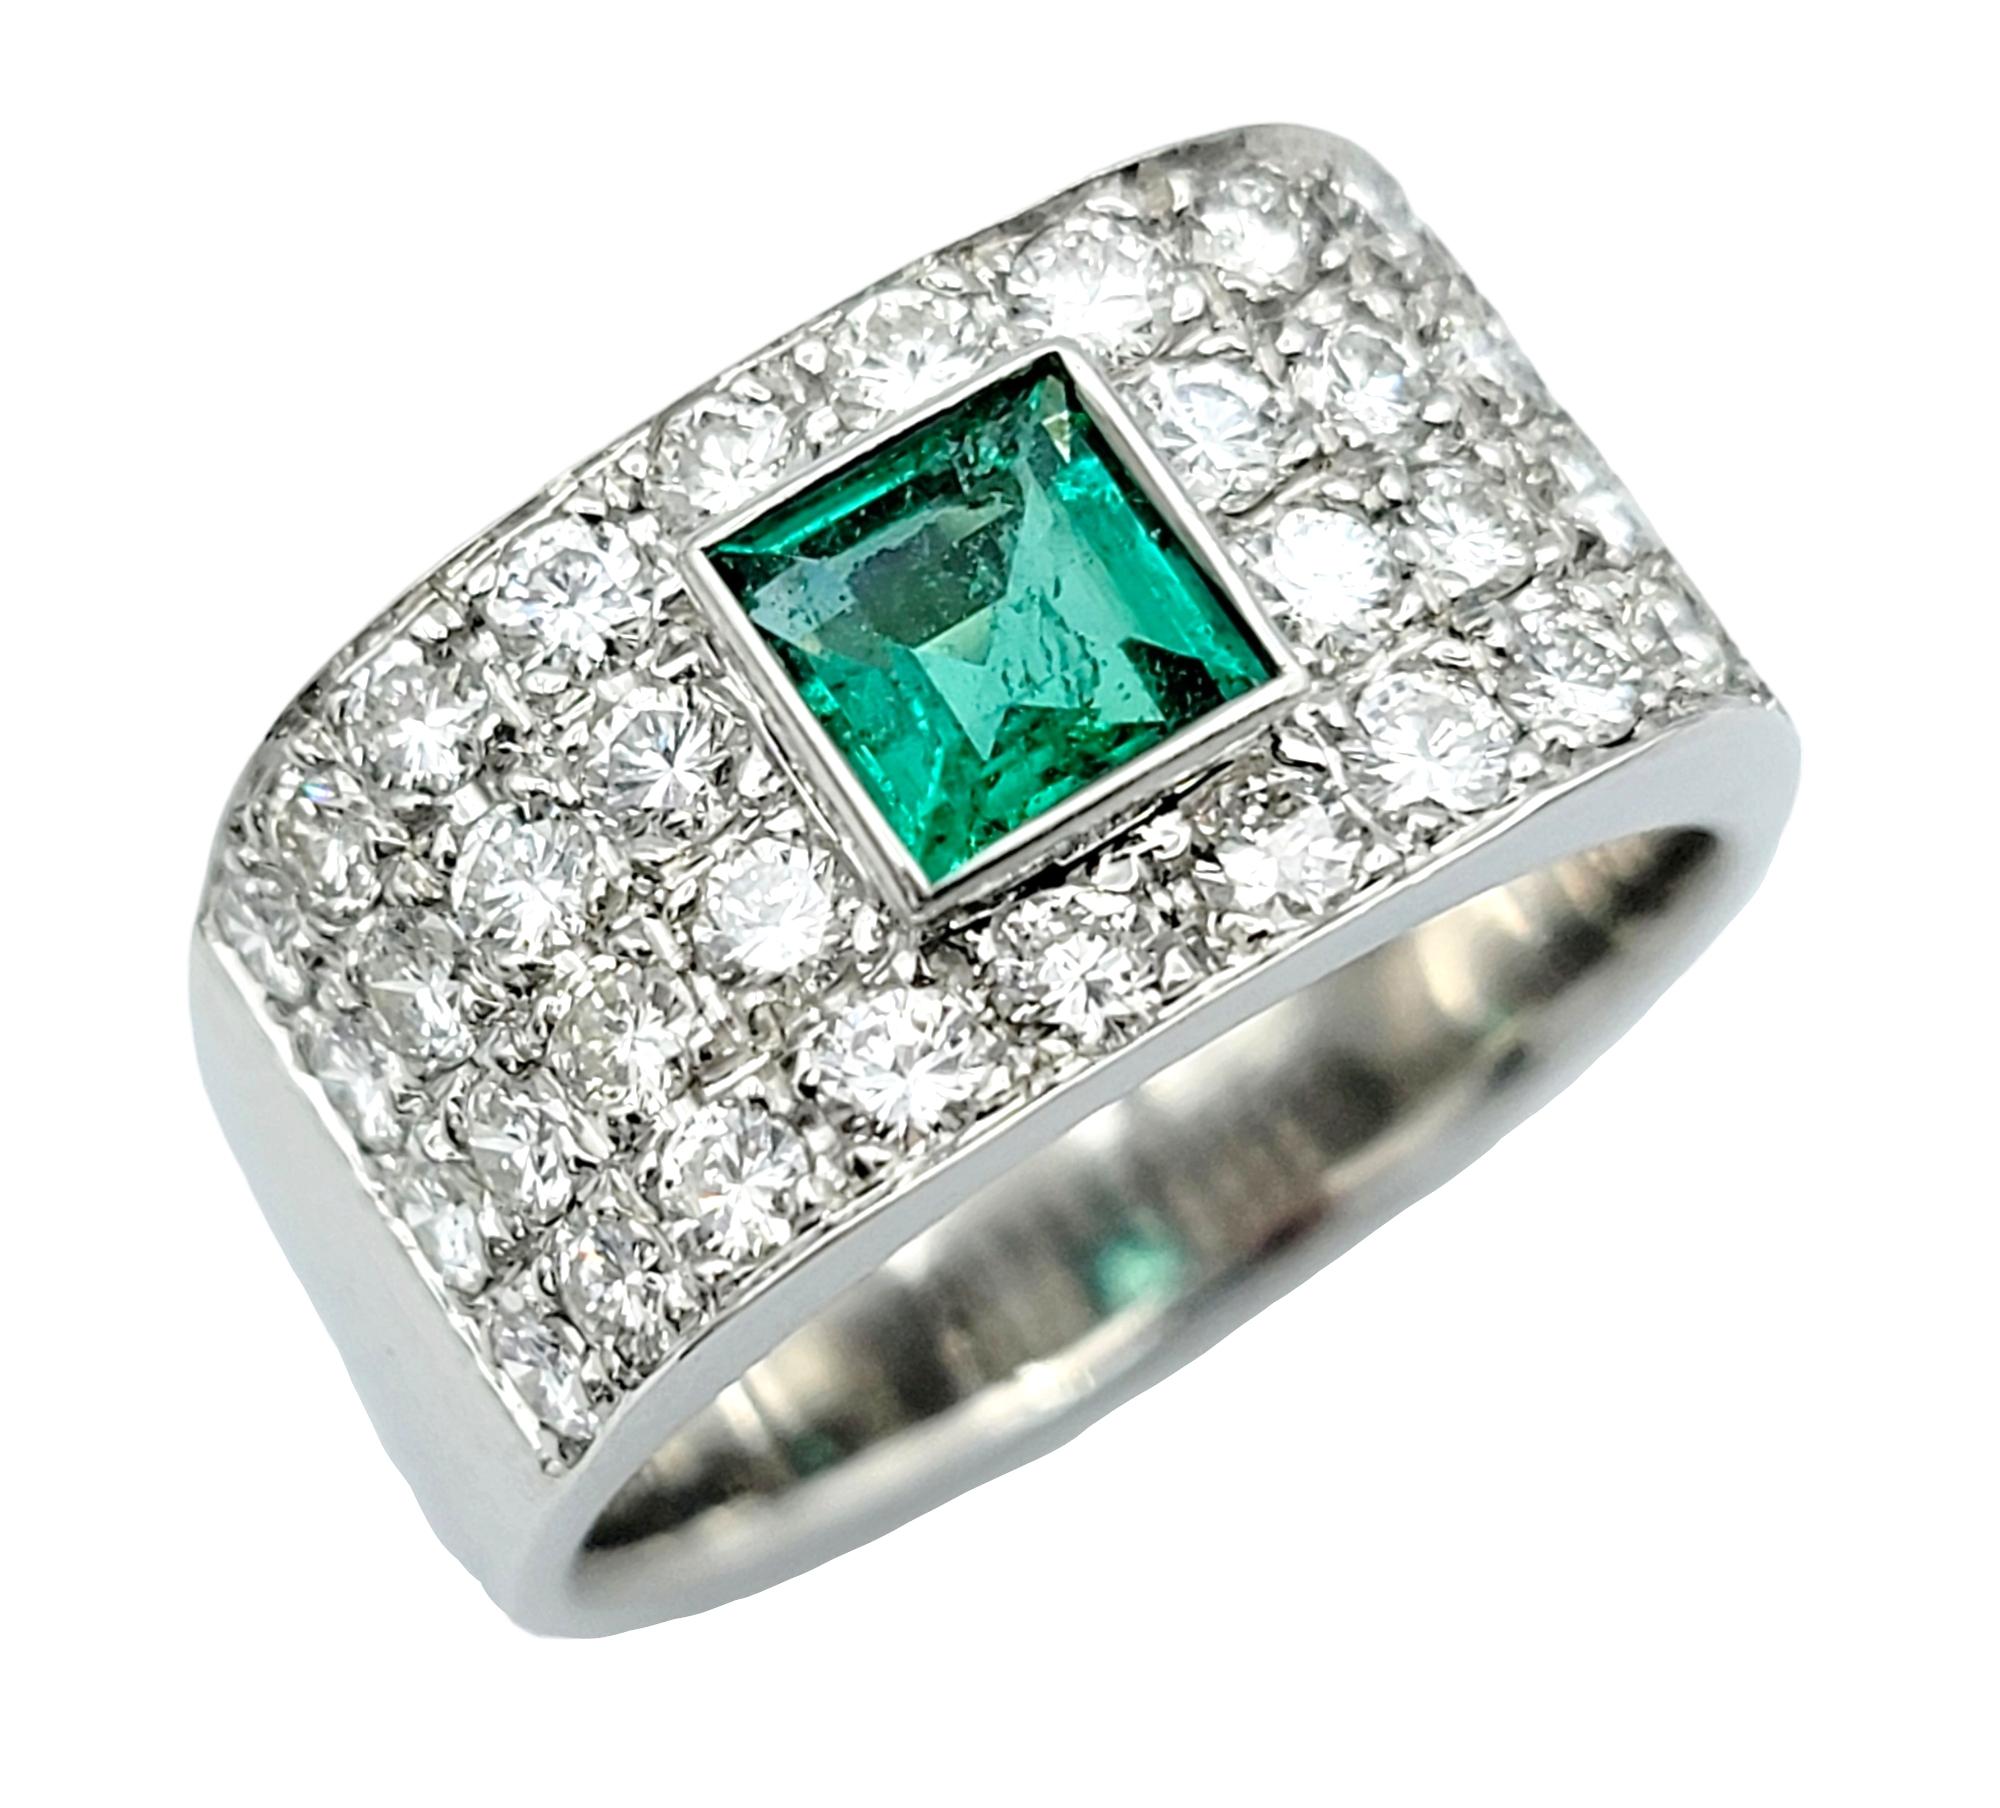 Ring size: 6.75

Introducing a beautiful expression of elegance and luxury, our emerald and multi-row pave diamond ring is a true masterpiece. Crafted with utmost precision in 18 karat white gold, this ring exudes timeless sophistication and